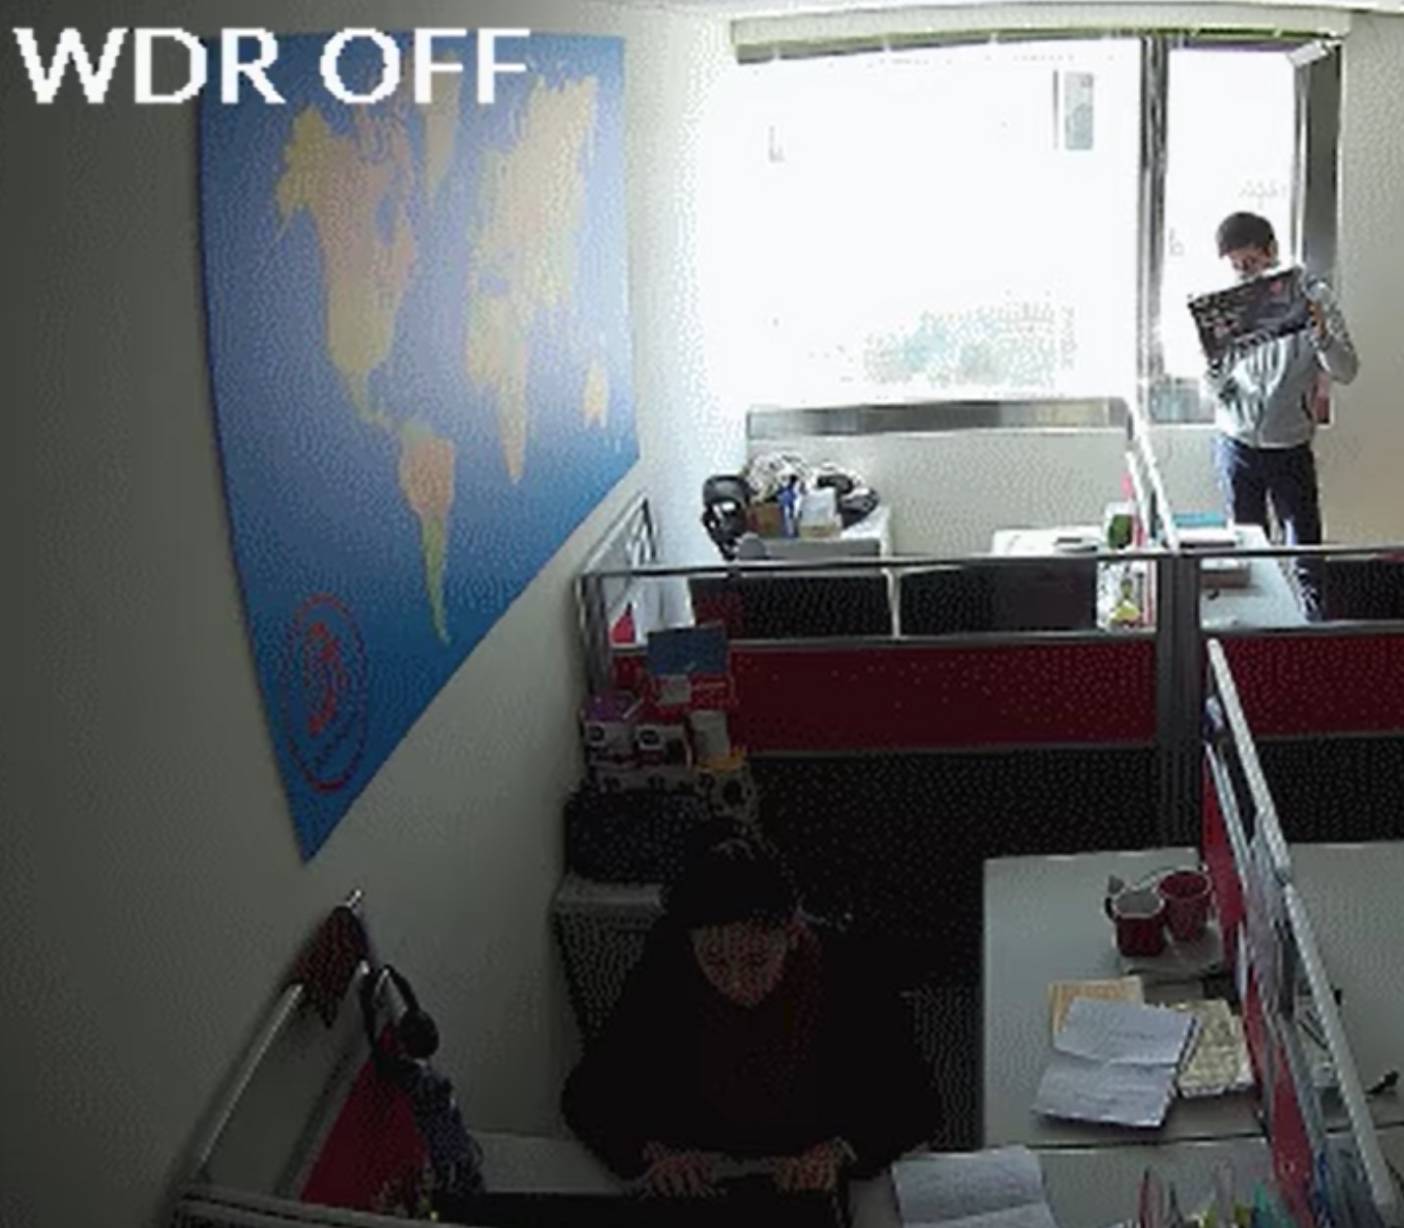 Current Trends and Specifics of WDR in CCTV